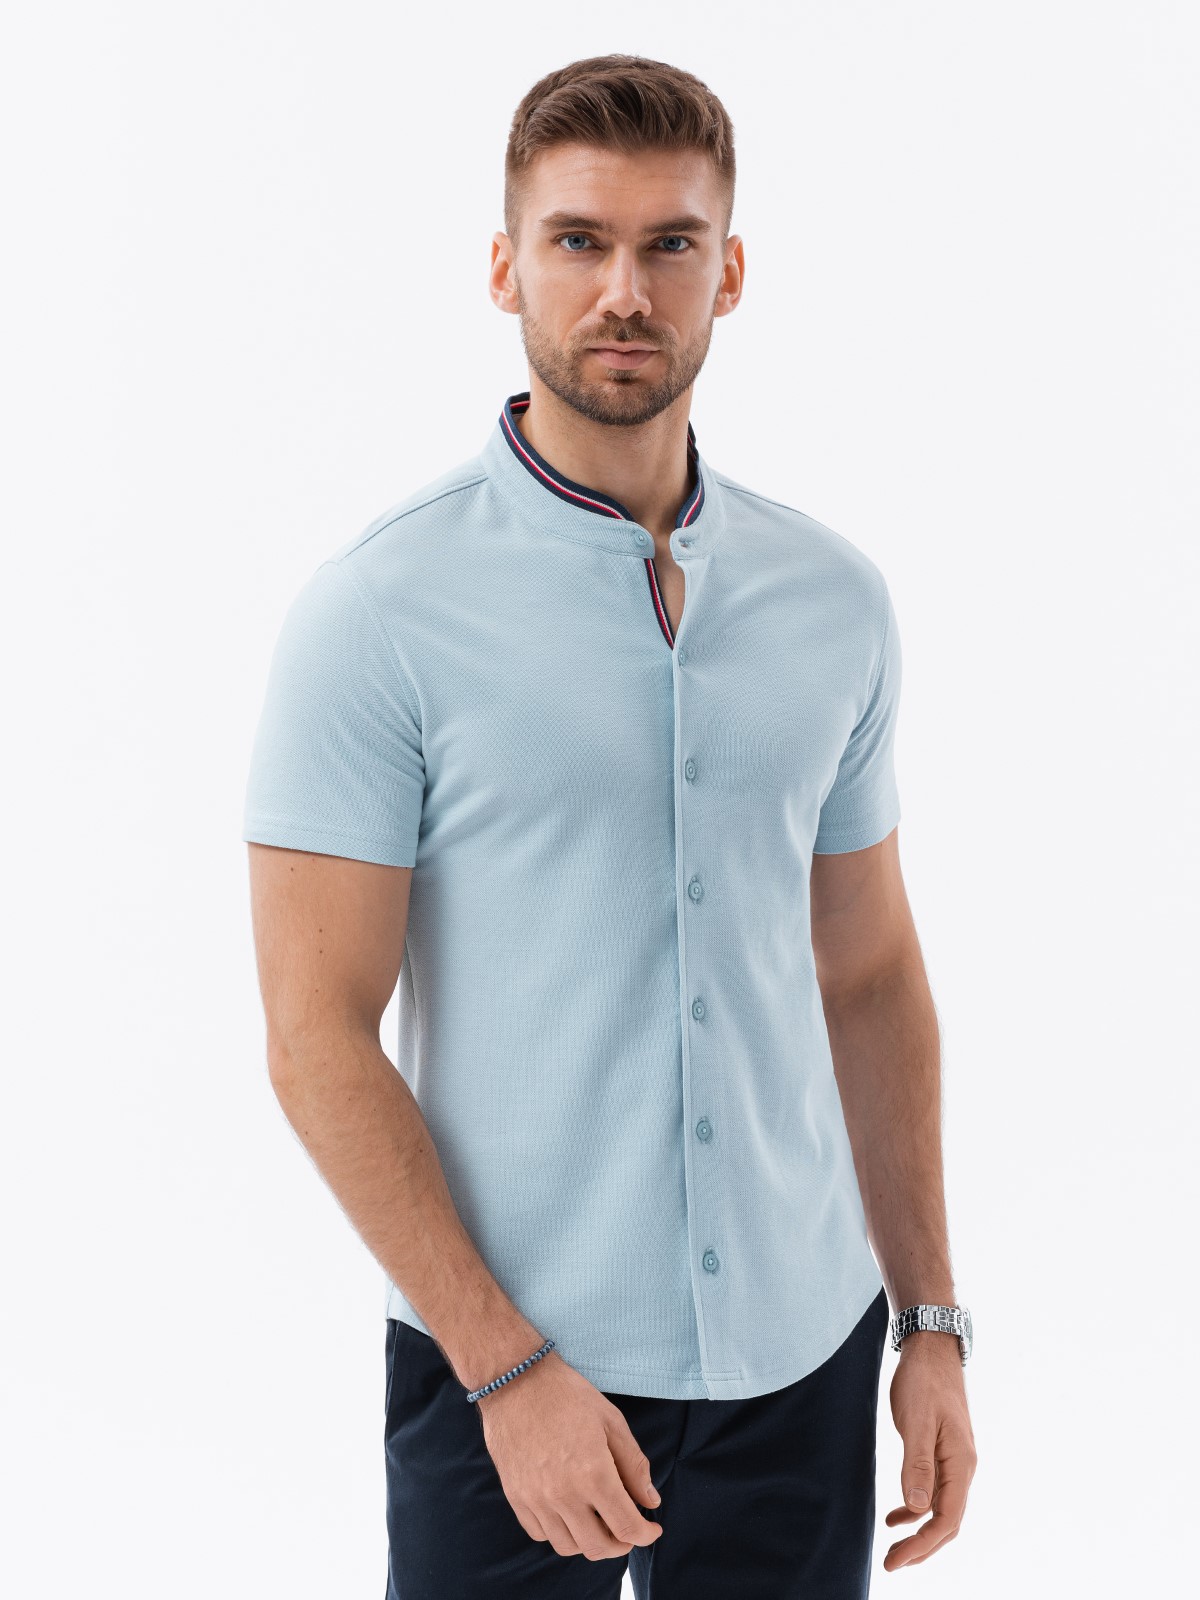 Ombre Men's knit shirt with short sleeves and collared collar - blue